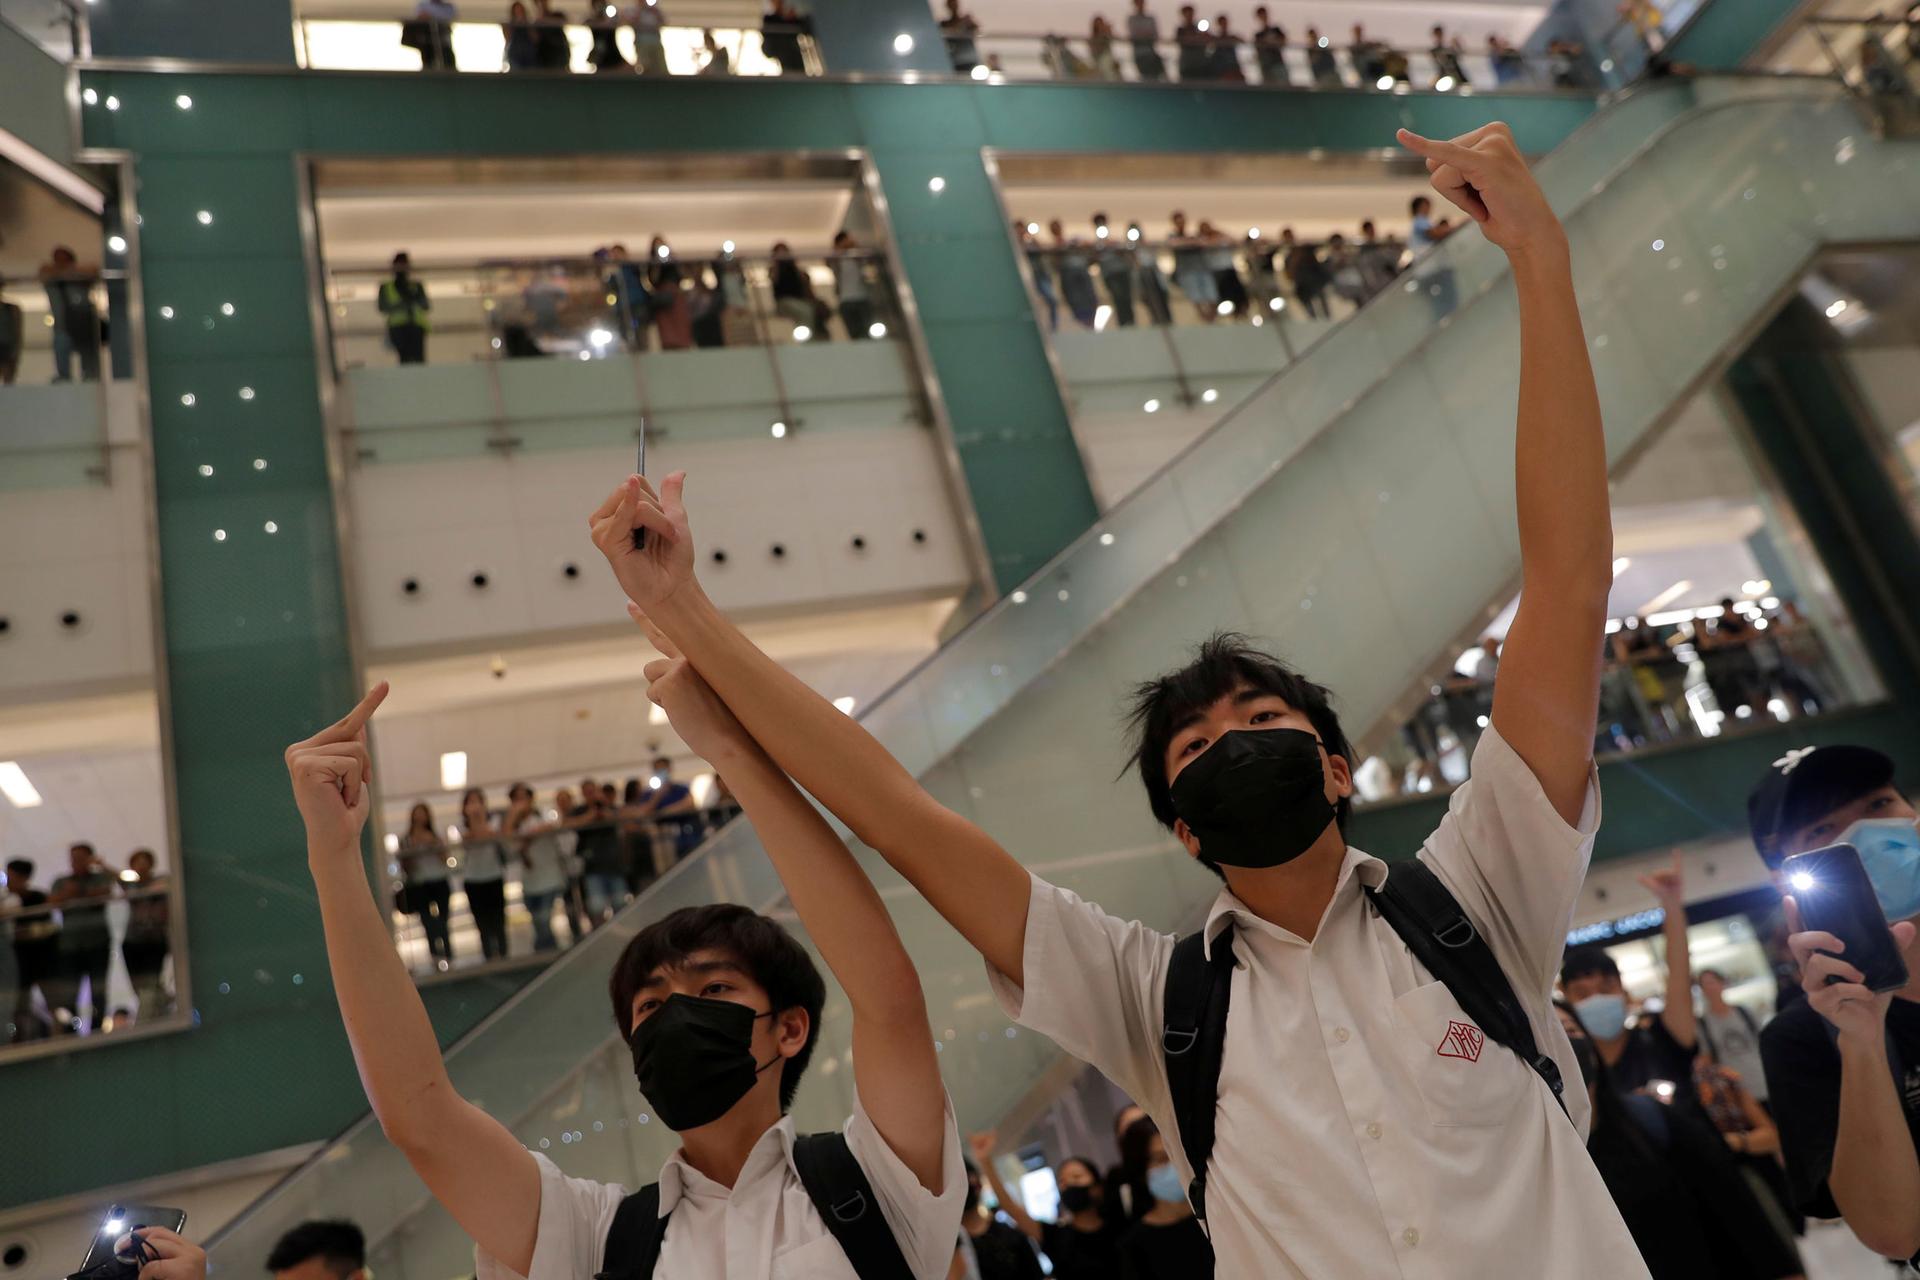 Two men are shown wearing back packs and black masks with their arms raised in the air gesturing.